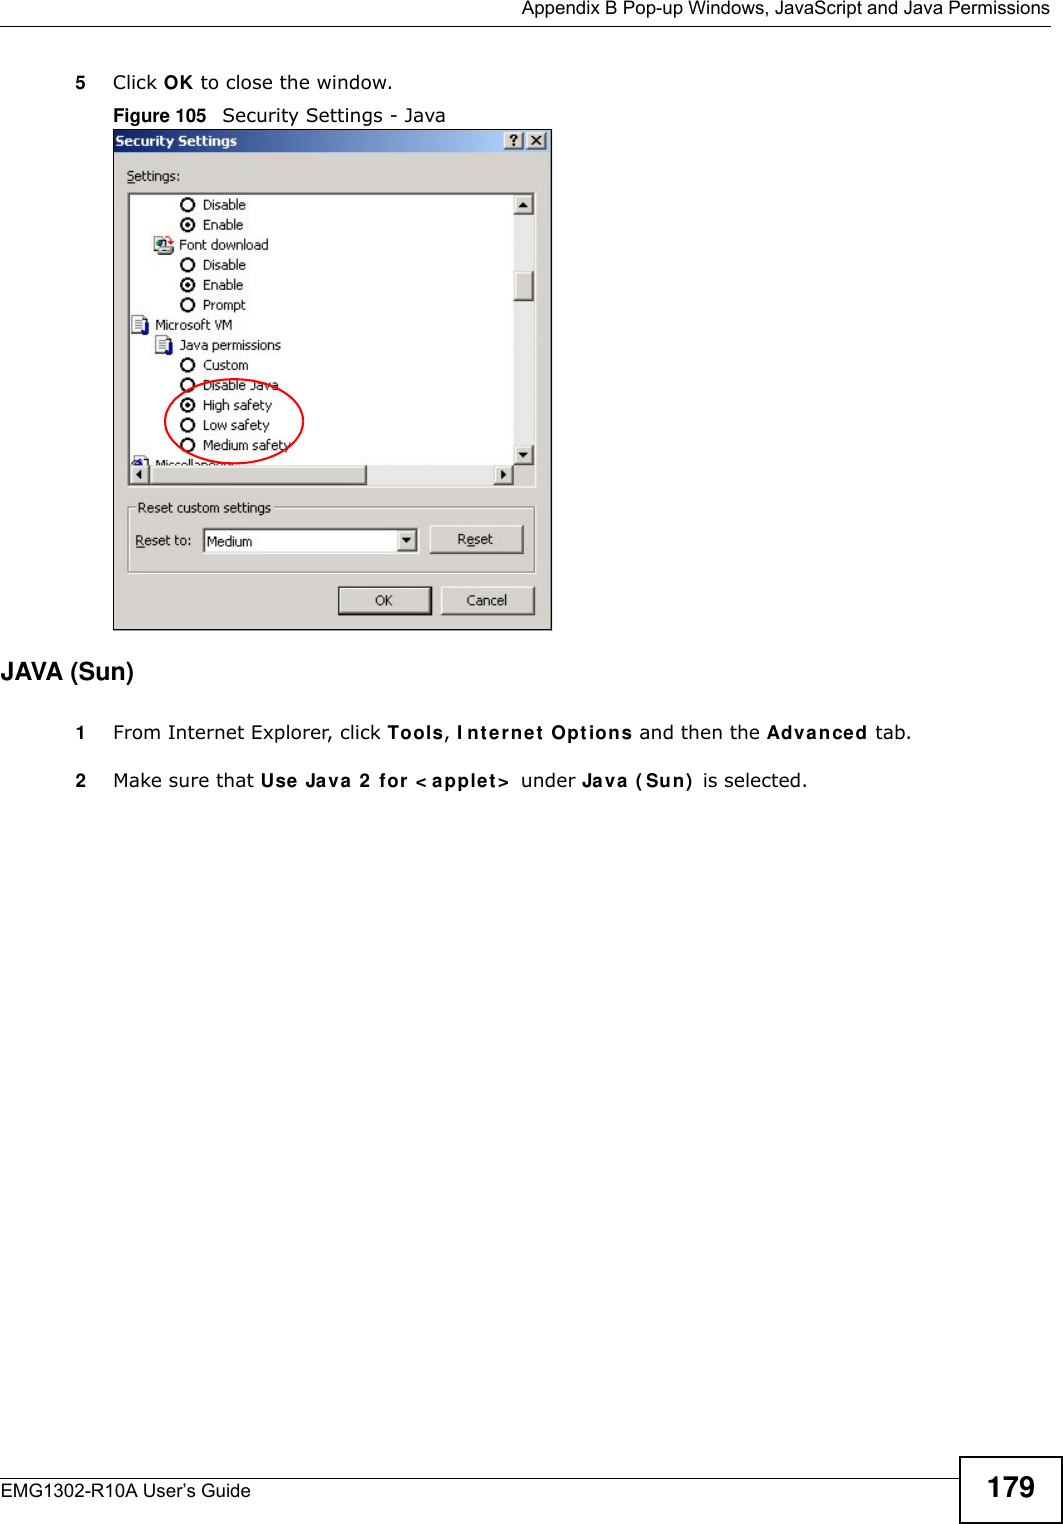  Appendix B Pop-up Windows, JavaScript and Java PermissionsEMG1302-R10A User’s Guide 1795Click OK to close the window.Figure 105   Security Settings - Java JAVA (Sun)1From Internet Explorer, click Tools, I nt e r ne t  Opt ions and then the Advanced tab. 2Make sure that Use Java 2  for &lt; applet &gt;  under Ja va  ( Sun)  is selected.